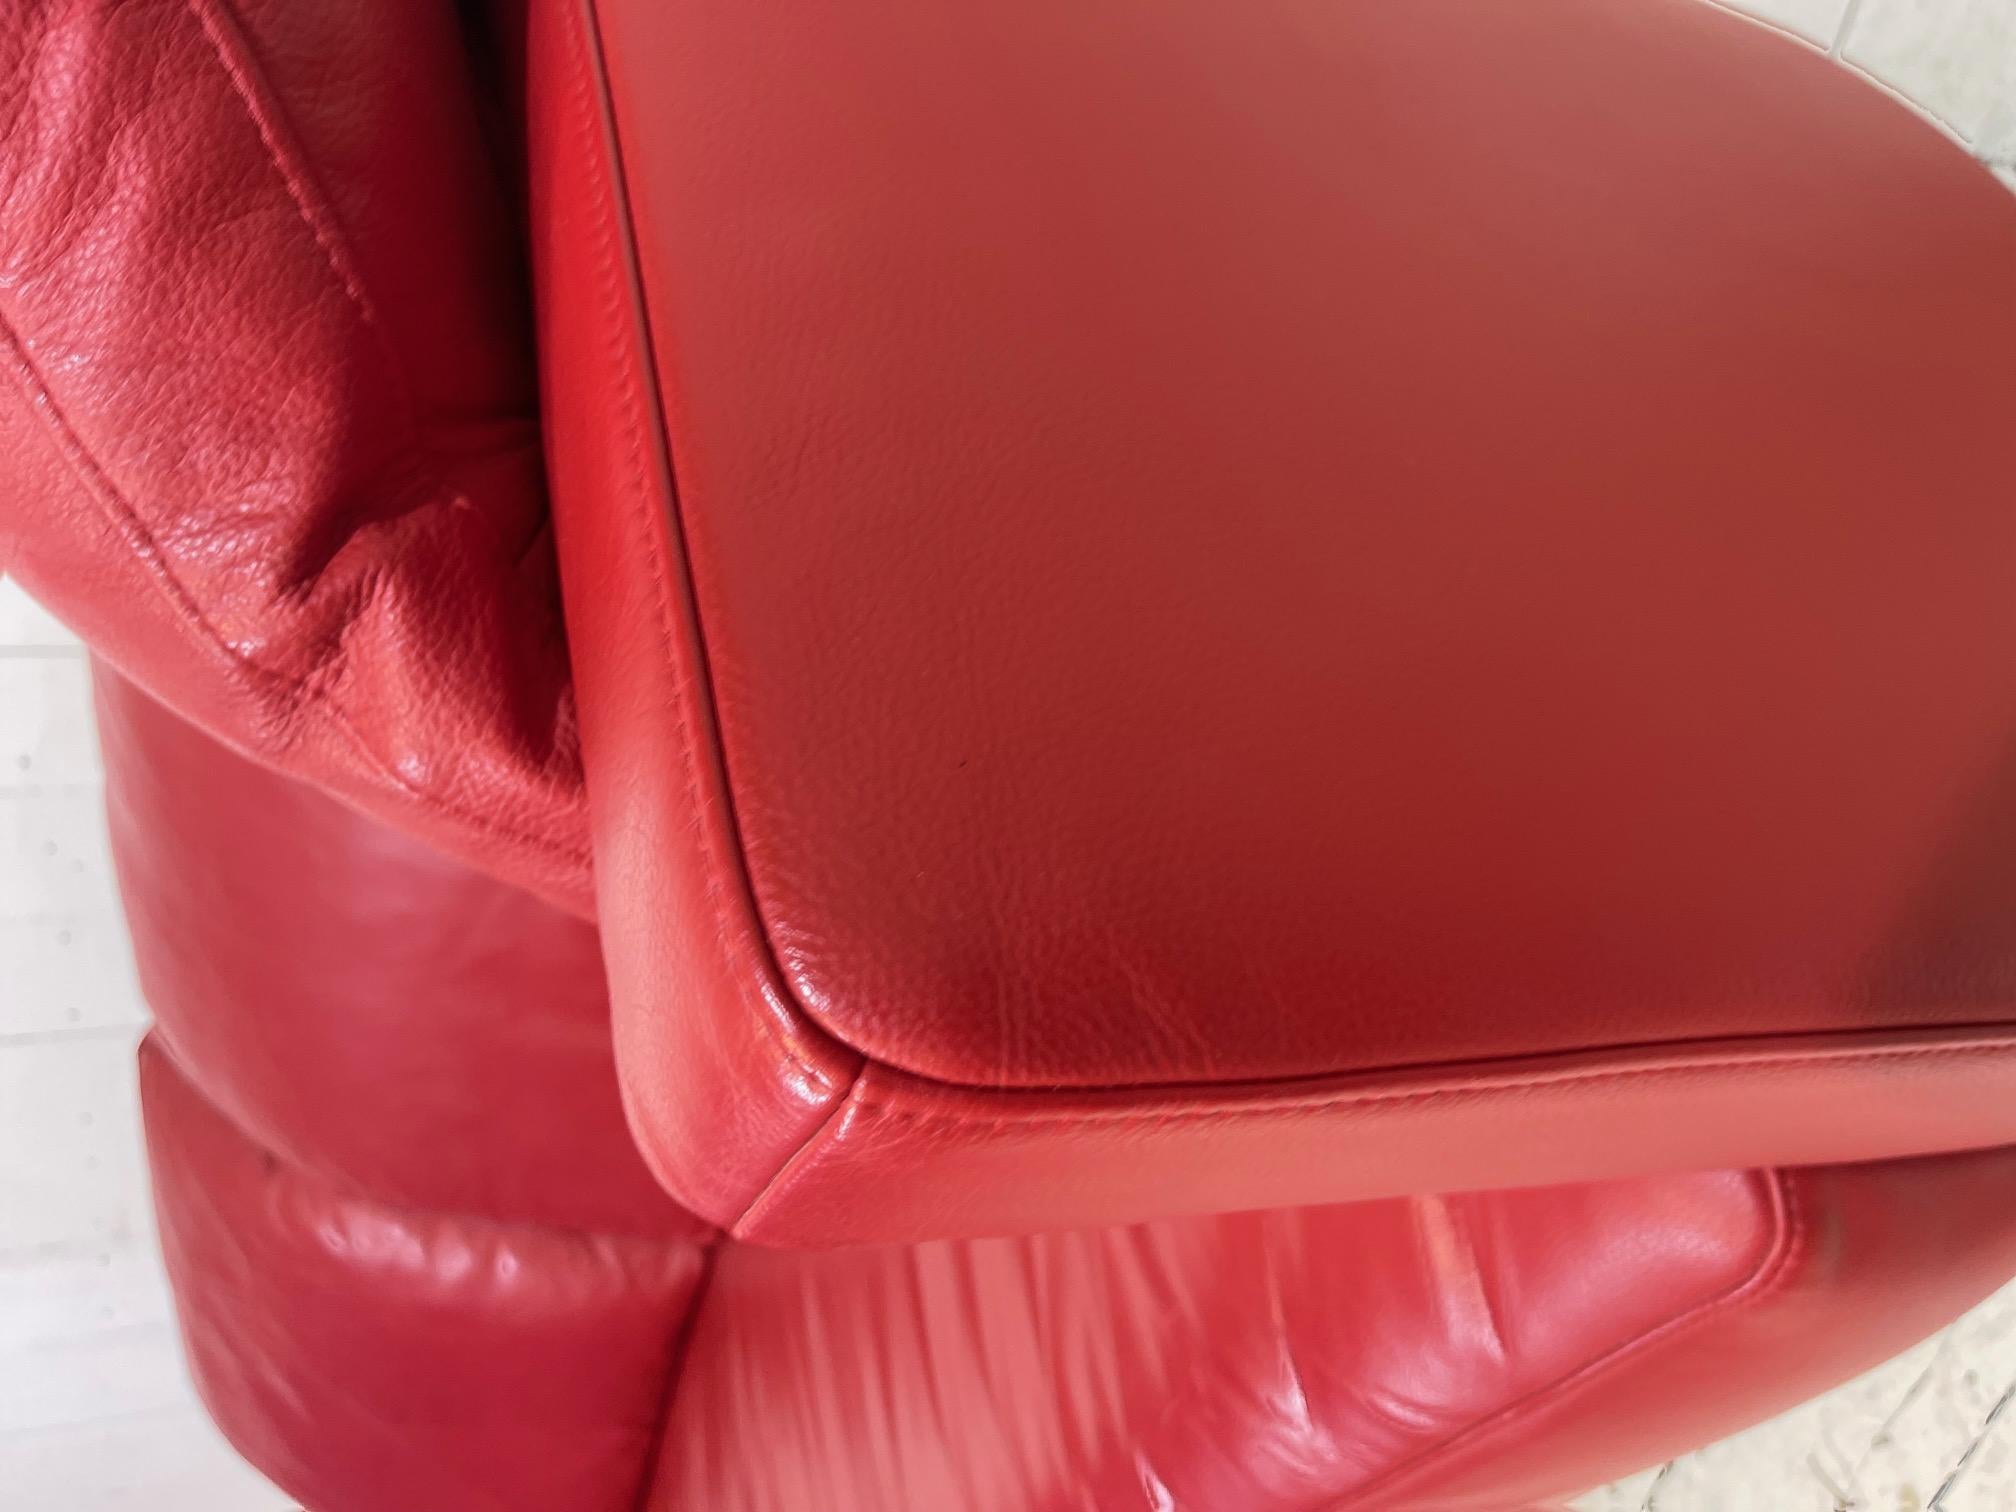 Late 20th Century Contemporary Limited Edition Red Leather Sofa and Footstool Set by Rolf Benz For Sale